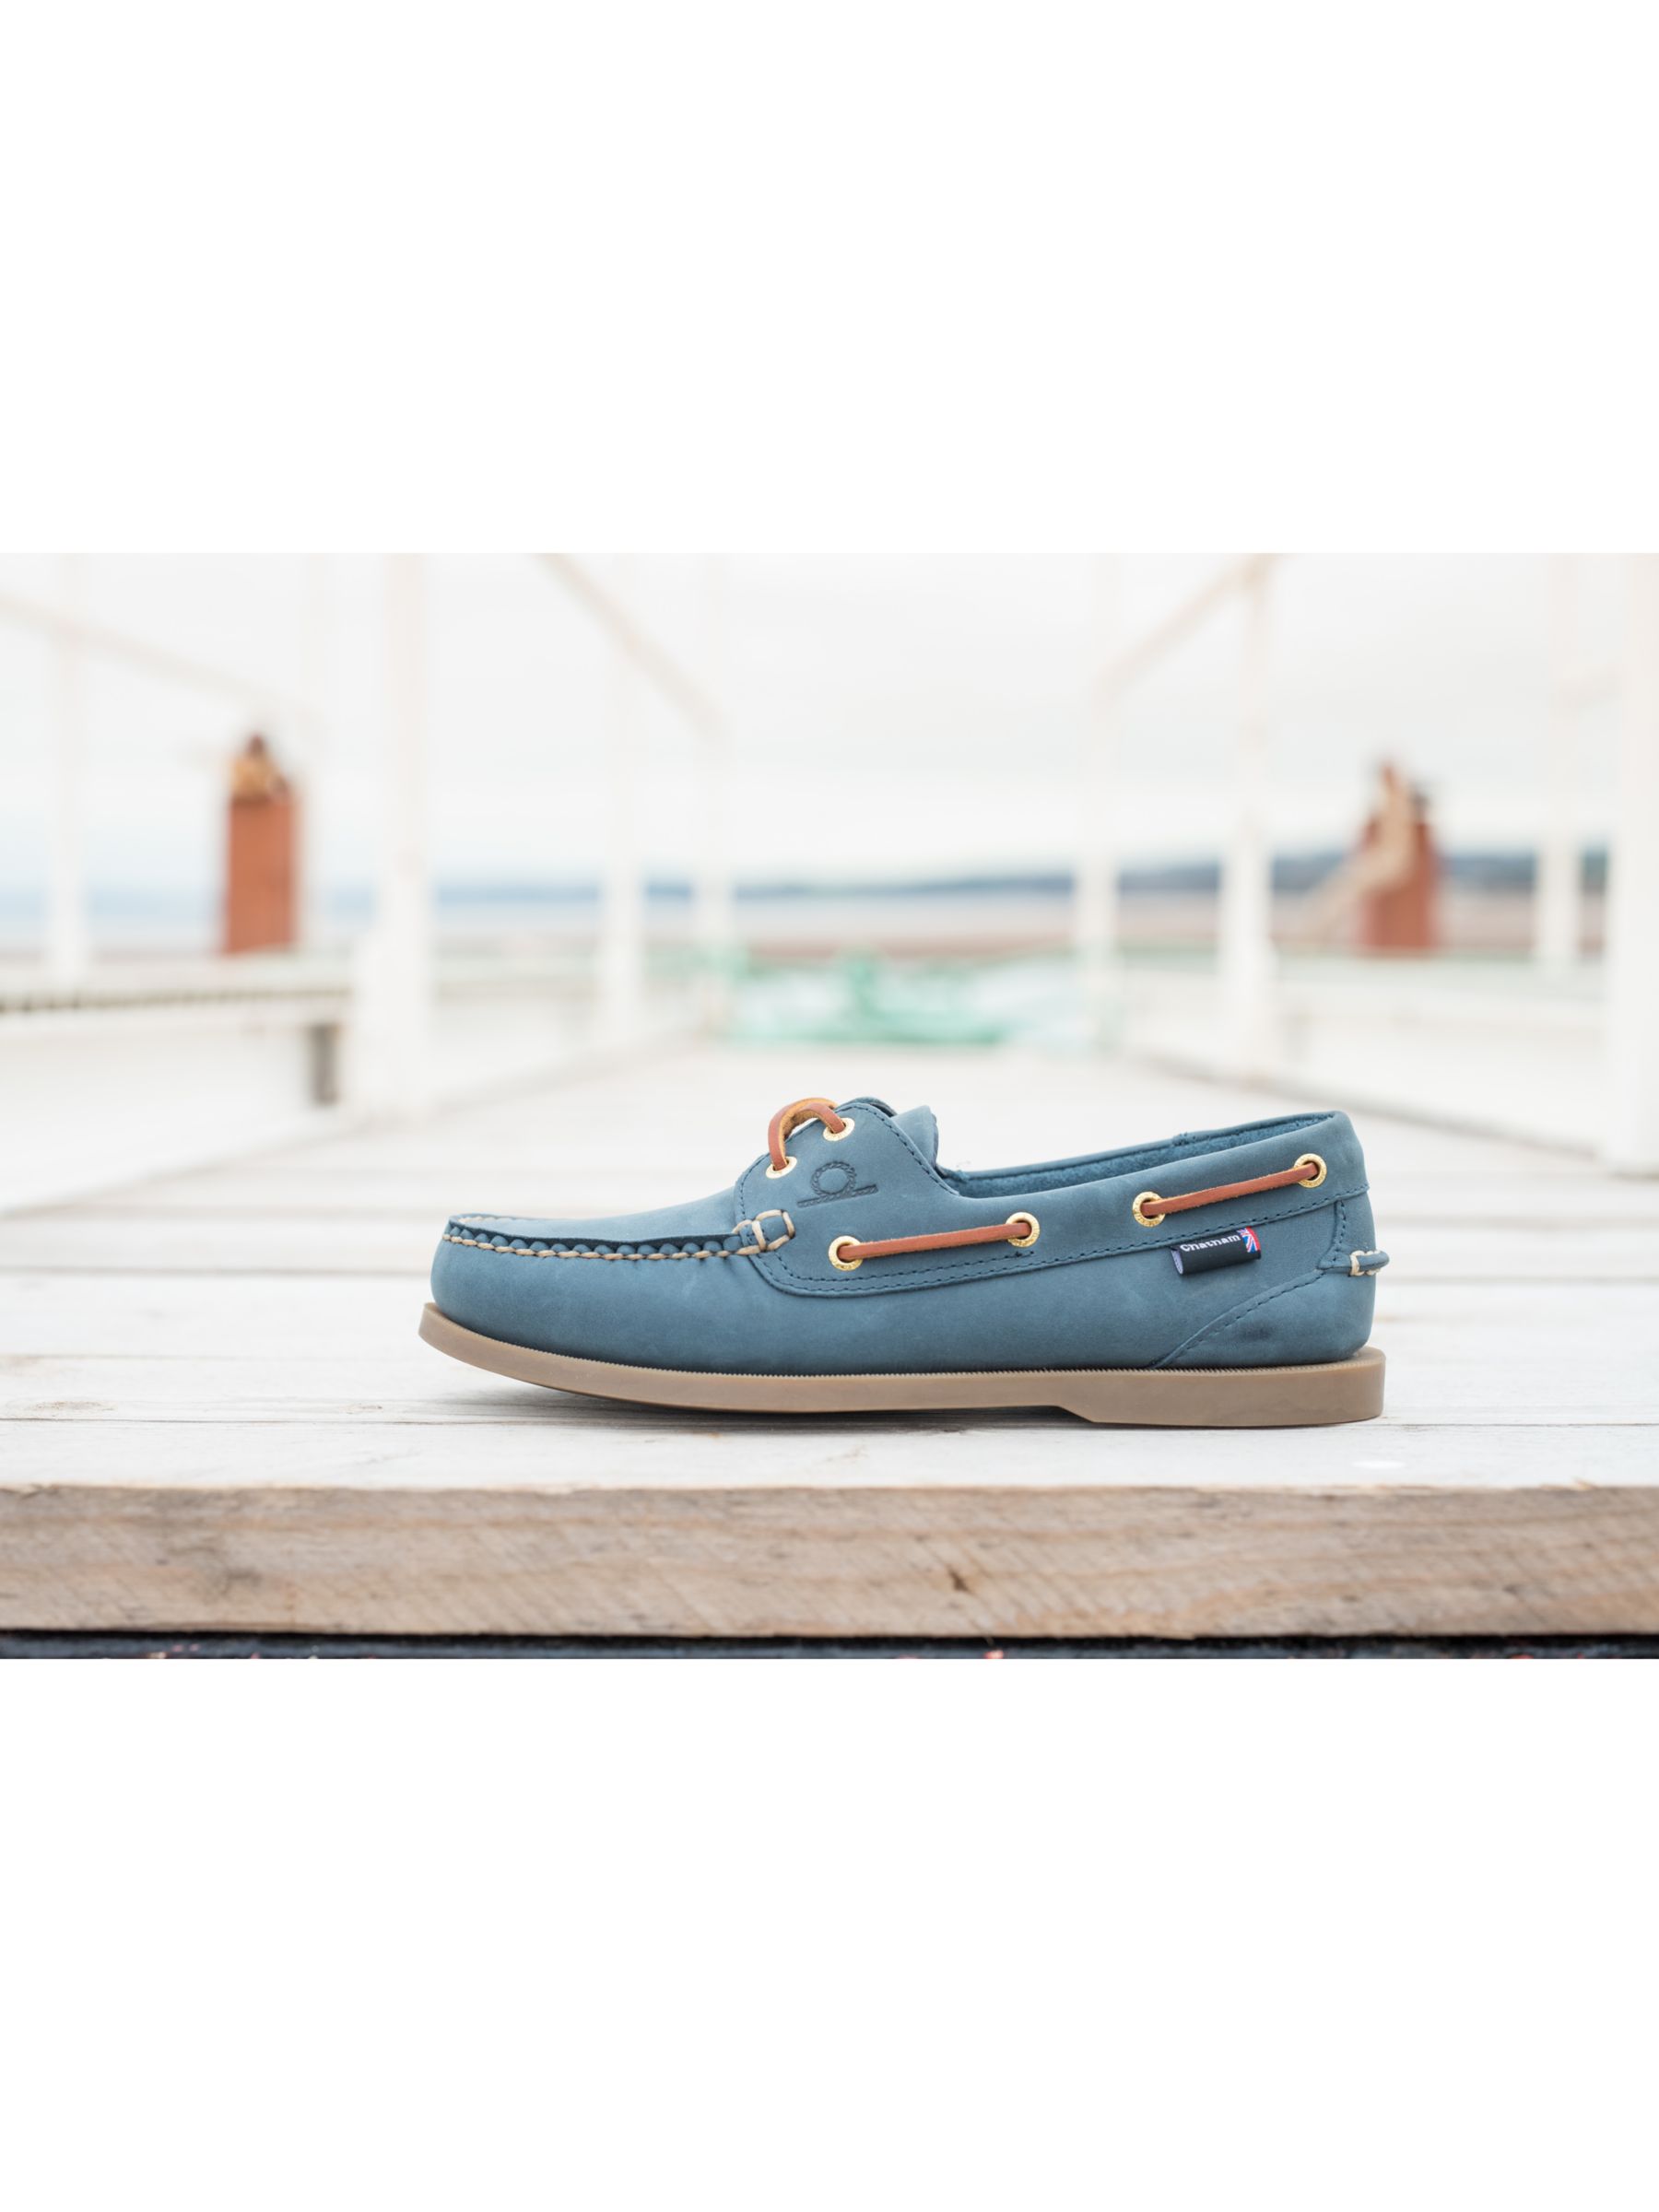 Chatham Deck II G2 Leather Boat Shoes, Blue, 7